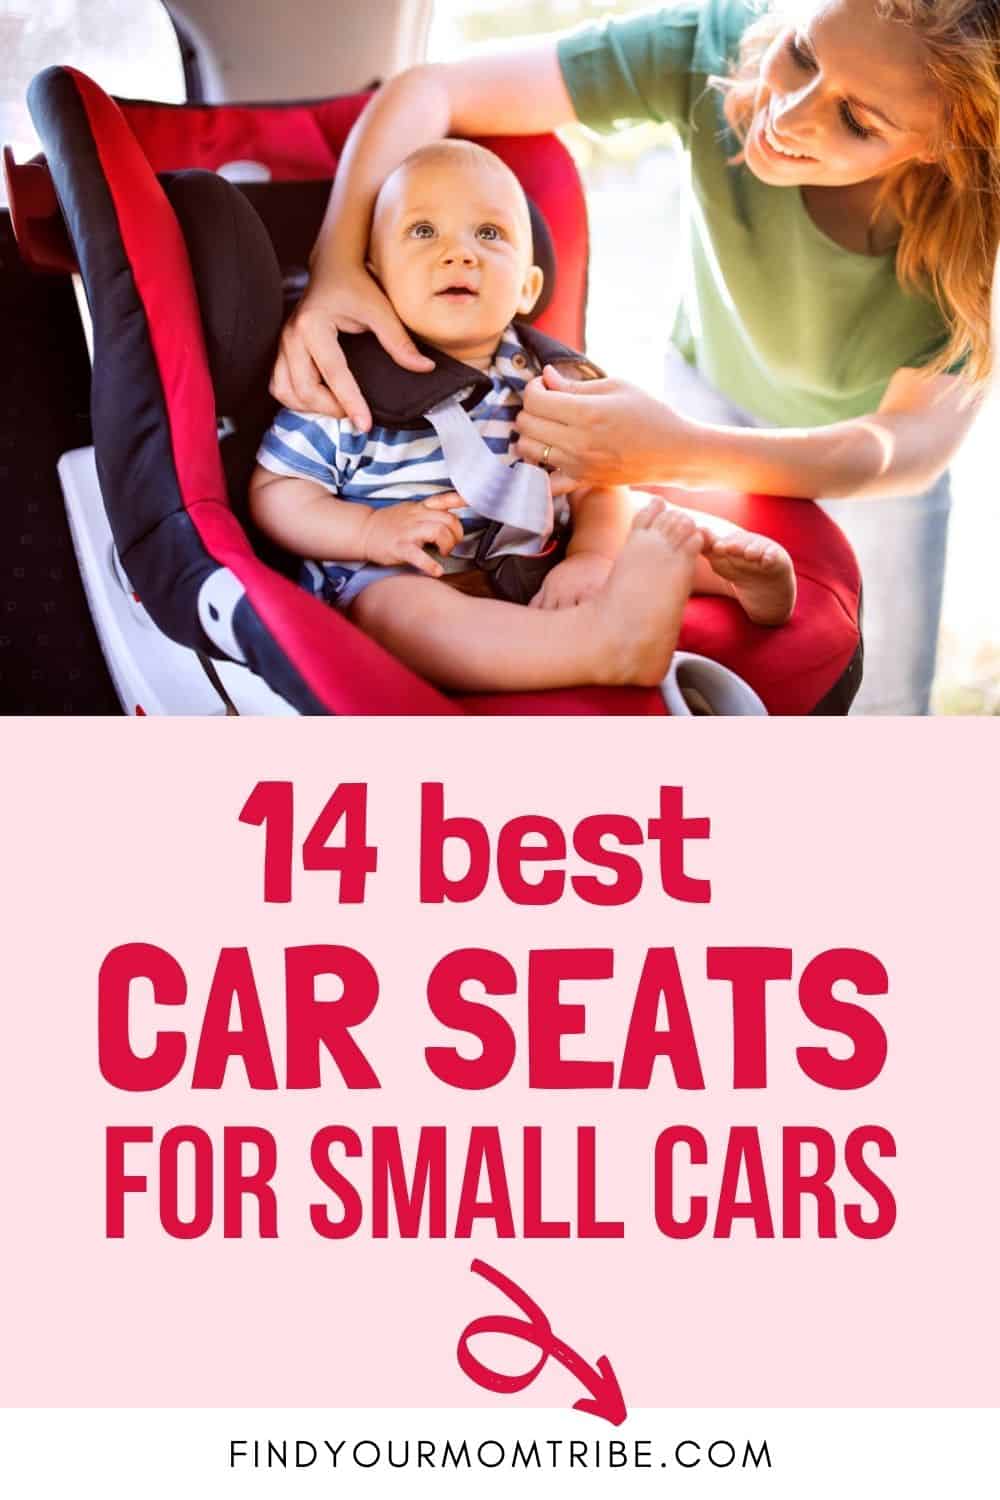 14 Best Car Seats For Small Cars Pinterest